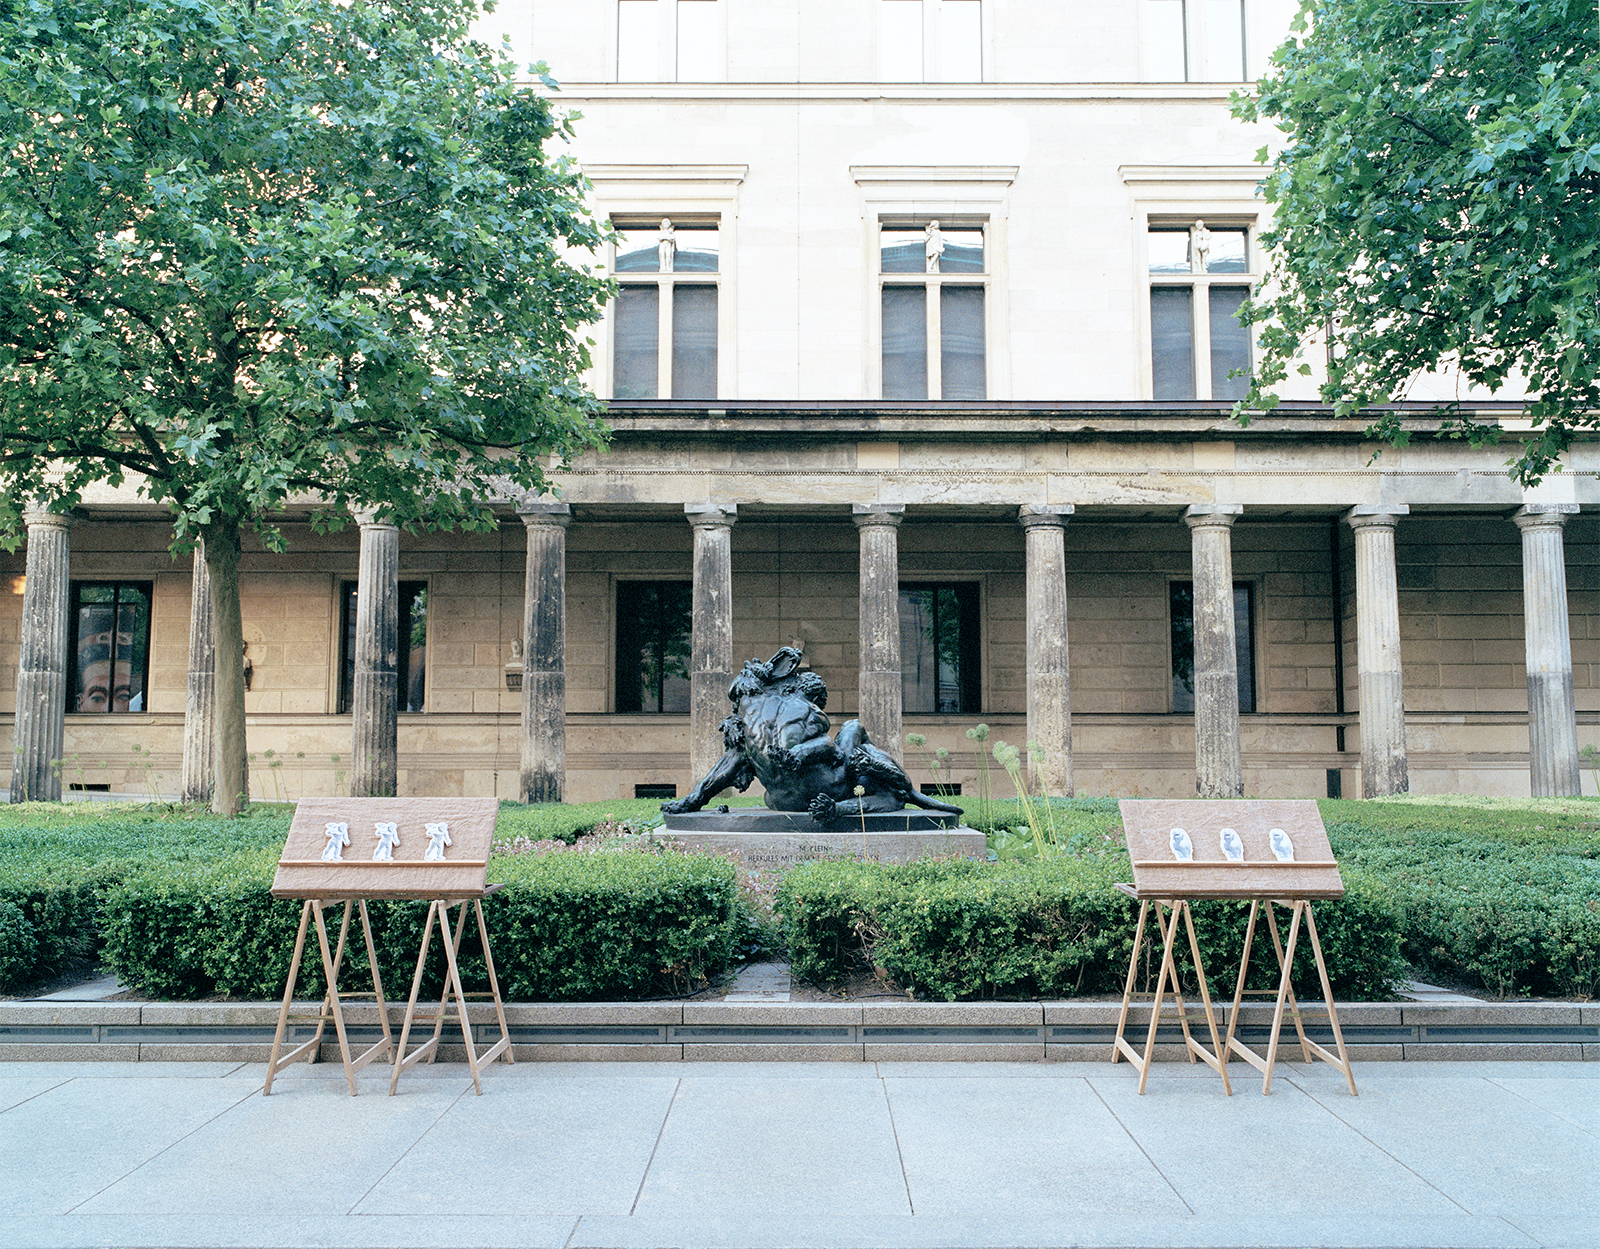 Hiro Hirakawa, view of the installation including the work (1879) by Max Klein in front of the Neues Museum, Berlin, Germany, Jun. 2021, 平川ヒロ